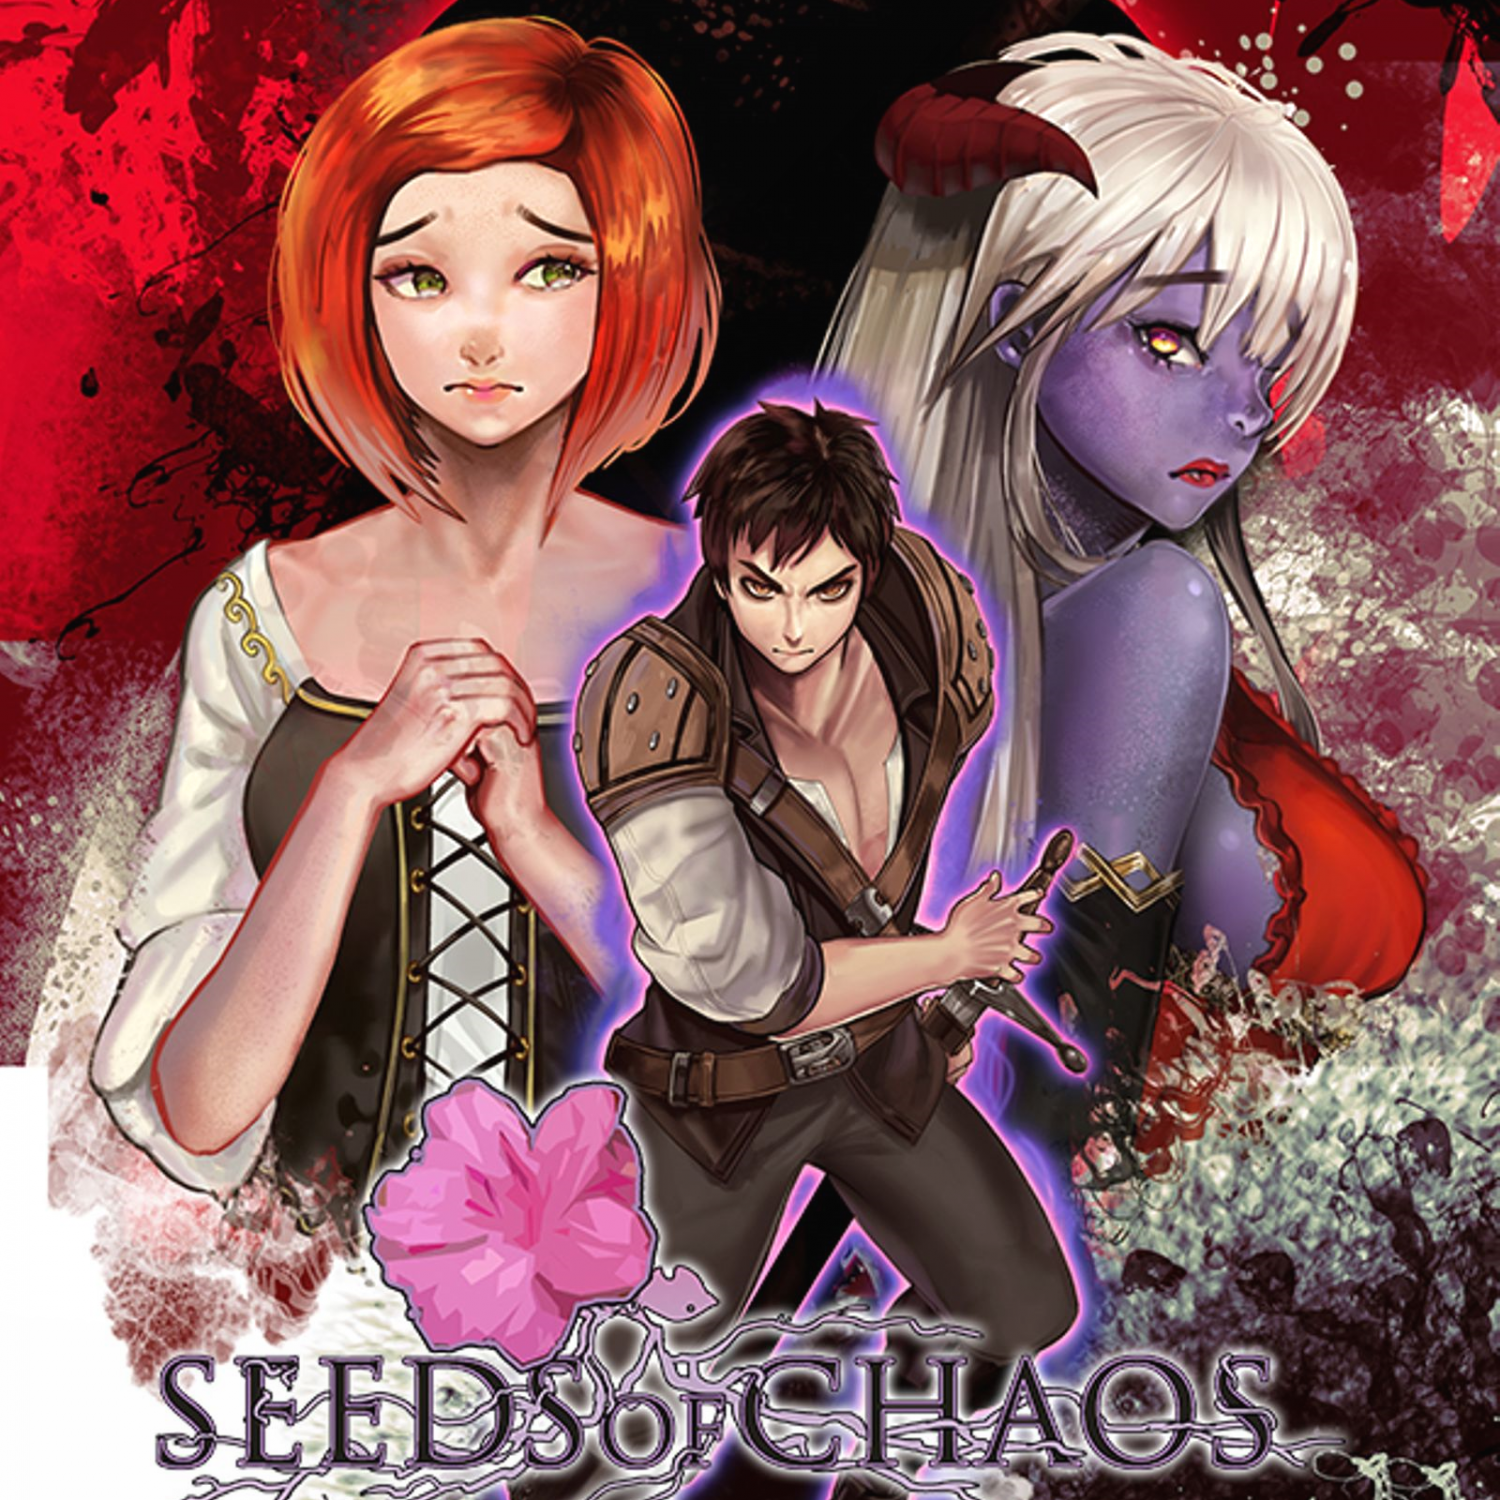 Seasoning reccomend seeds chaos intro